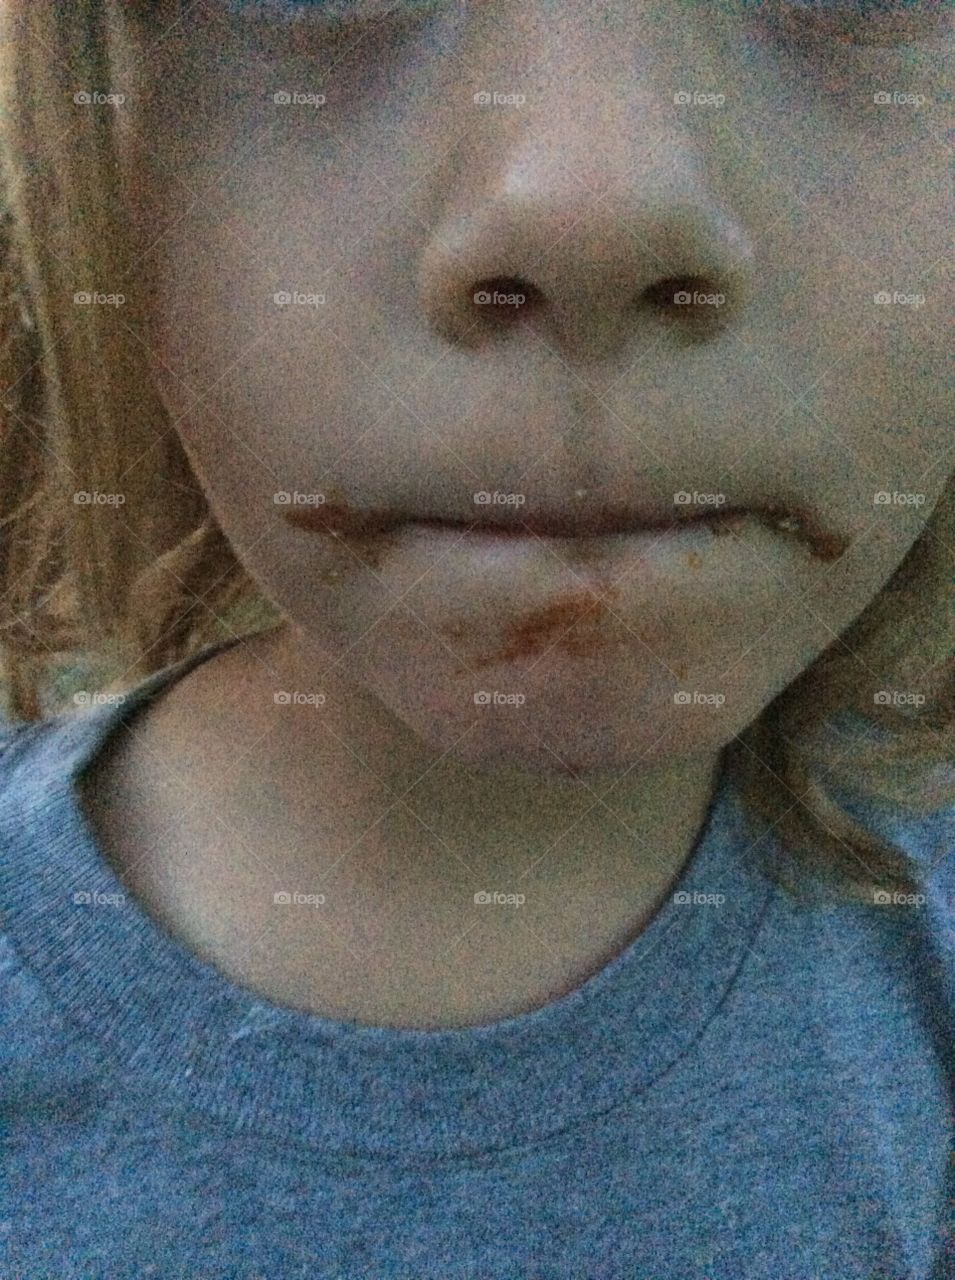 S'more mouth 